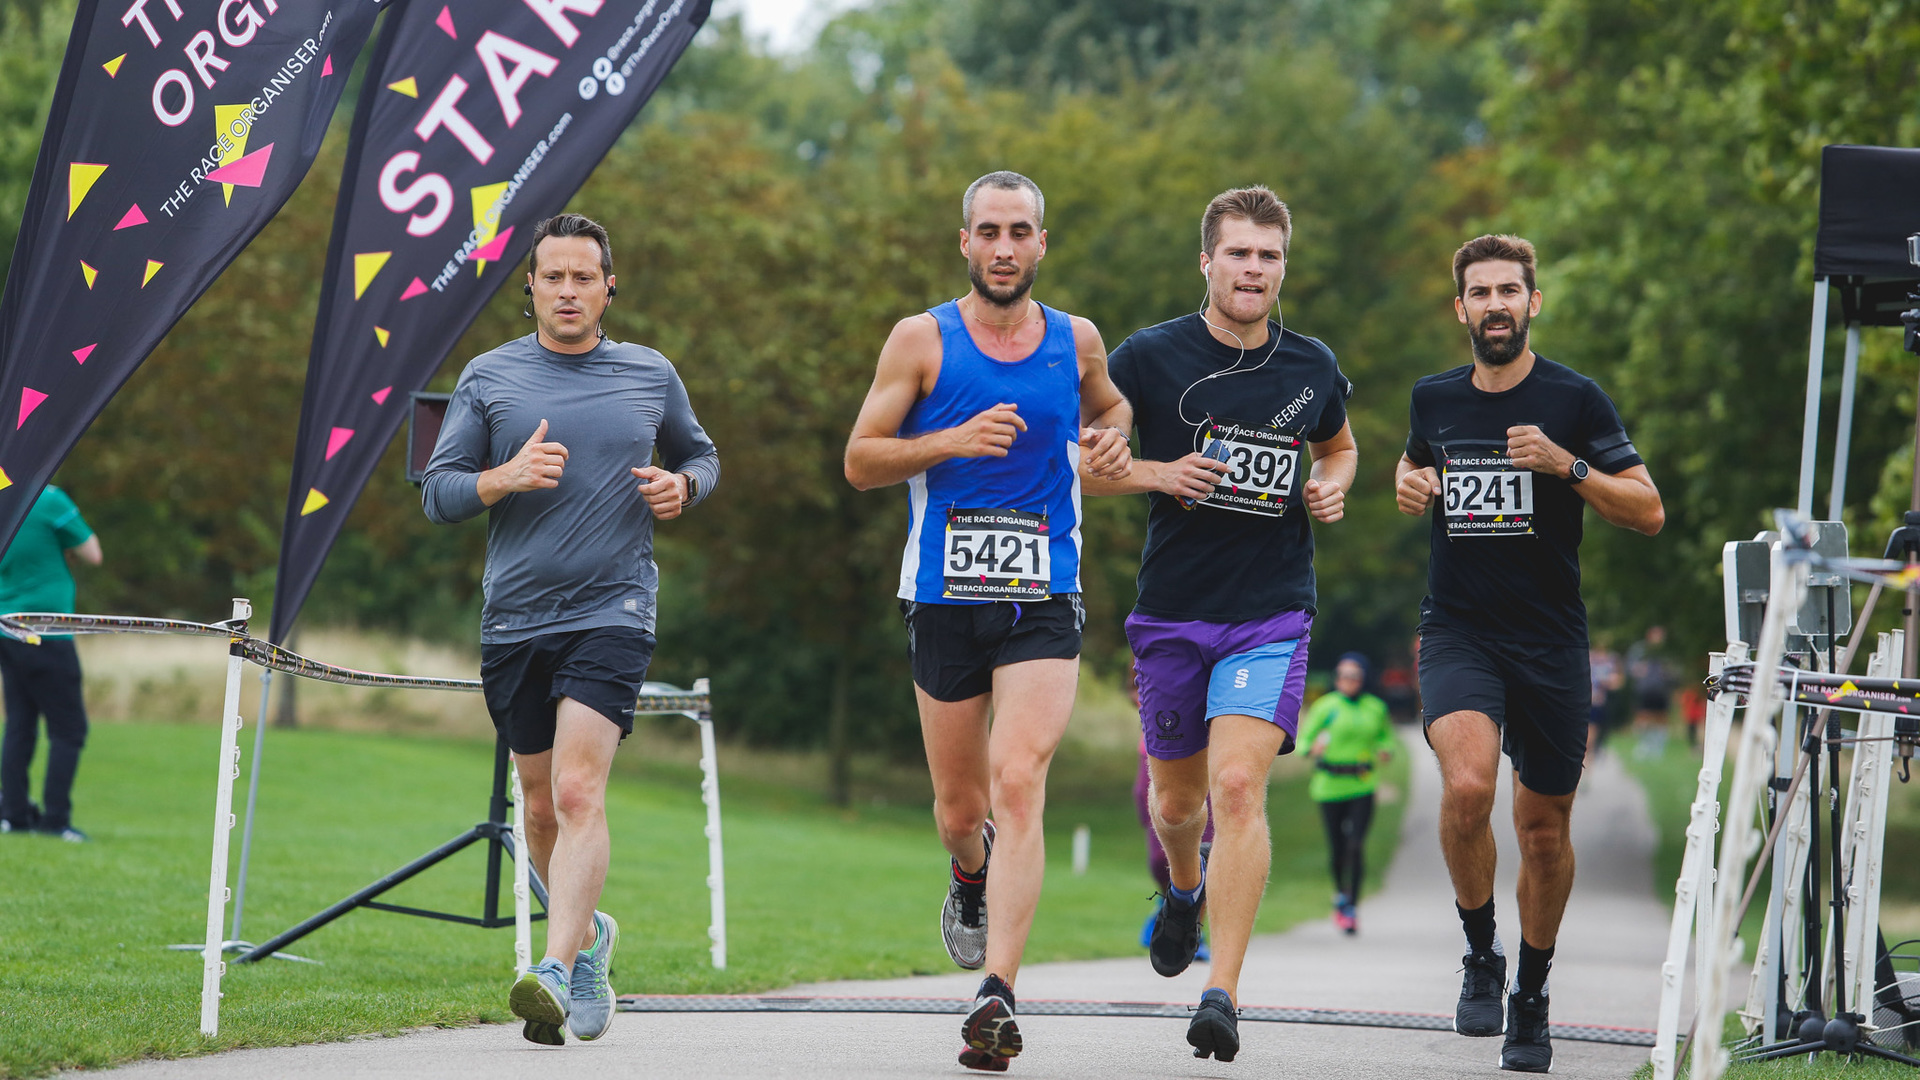 The Regent's Park 10K Winter Series by The Mornington Chasers, London, England, United Kingdom